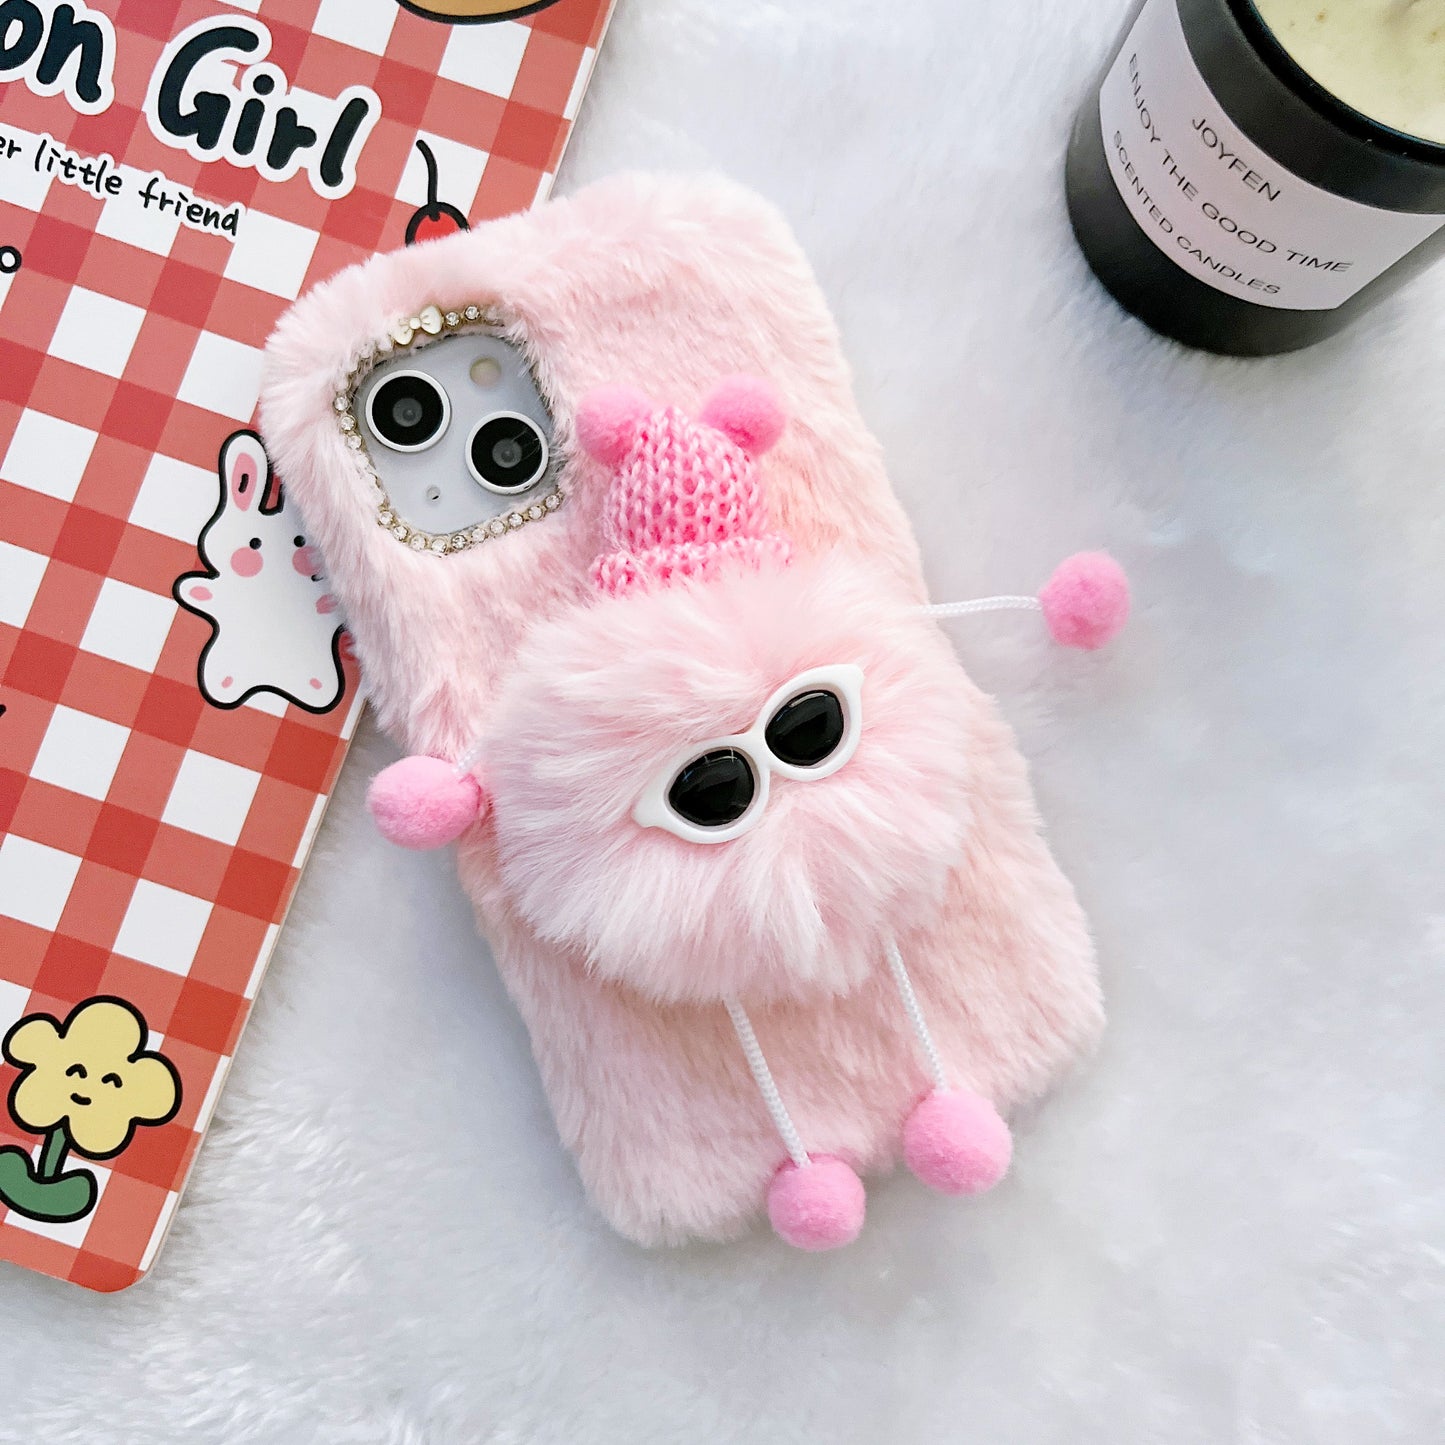 iPhone case,Fluffy and cute.